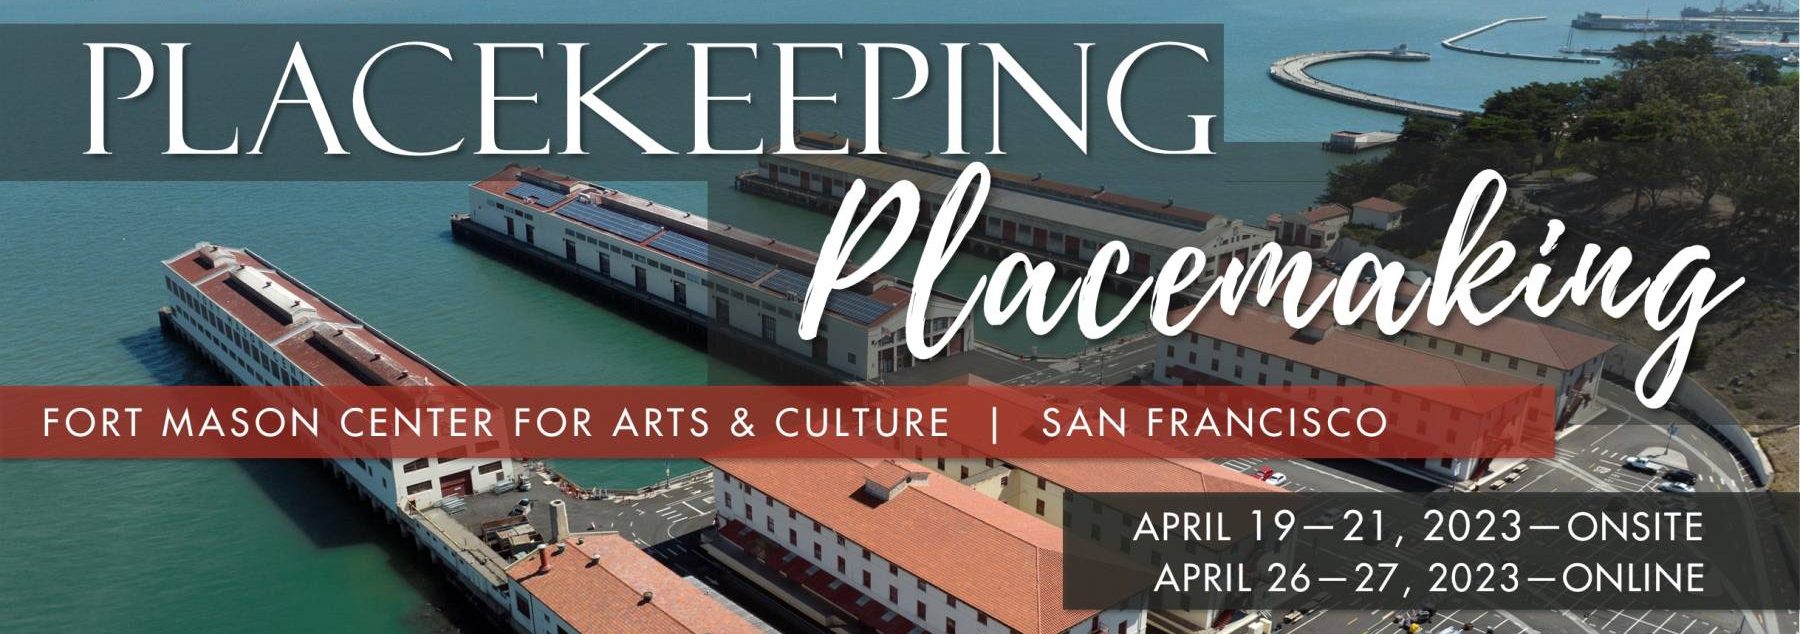 2023 California Preservation Conference - Placekeeping/Placemaking